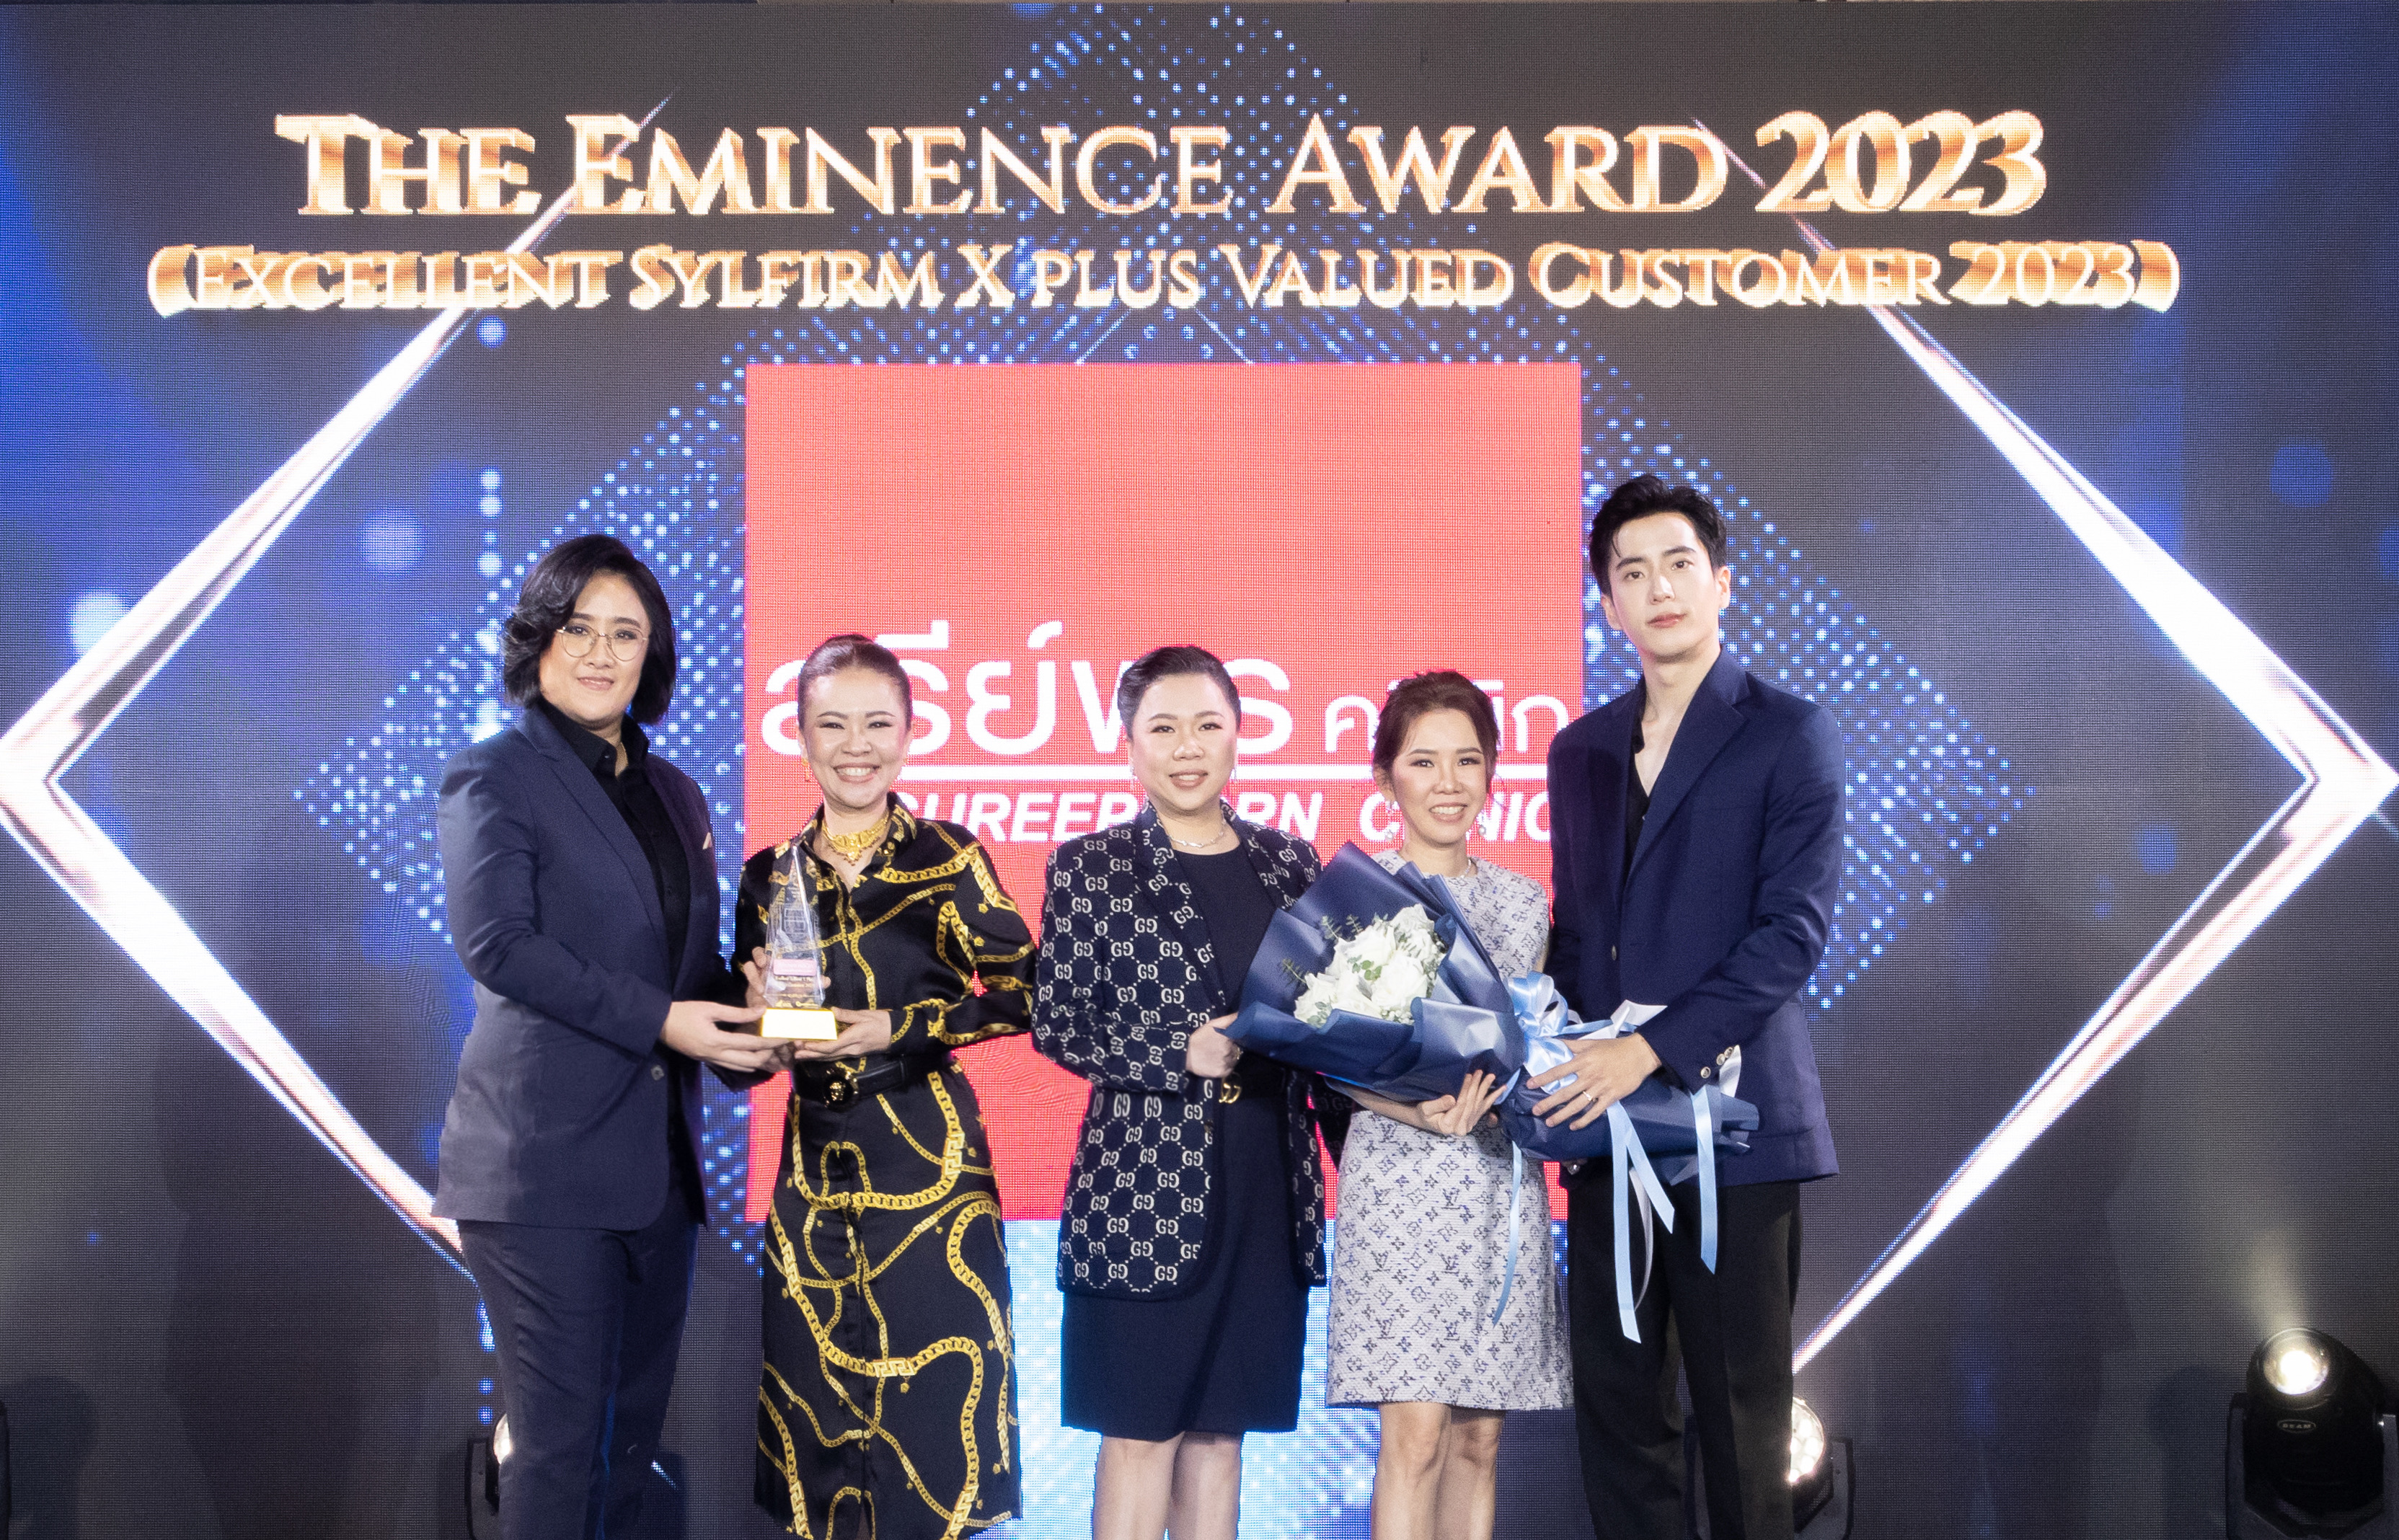 The Eminence Award2023 EXCELLENT SYLFIRM X PLUS VALUED CUSTOMER 2023